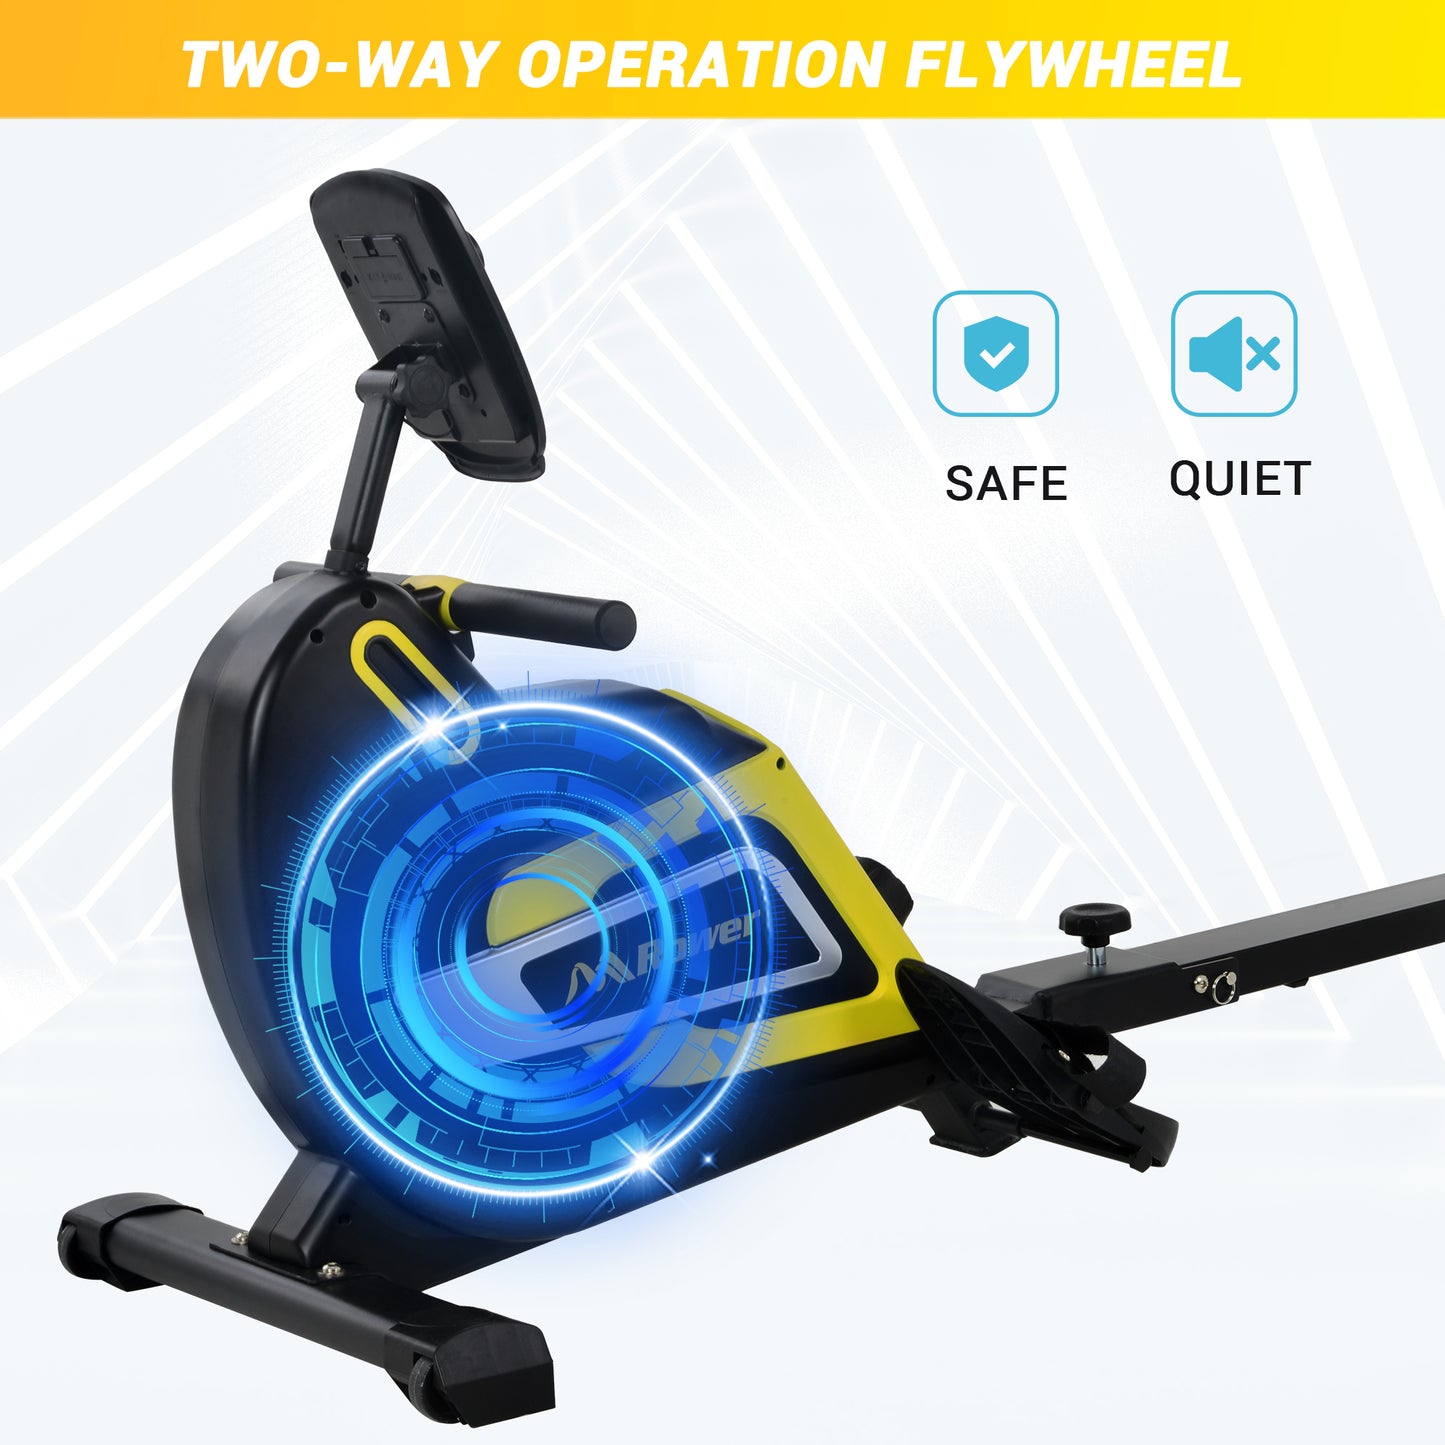 Magnetic Rowing Machine Folding Rower with 14 Level Resistance